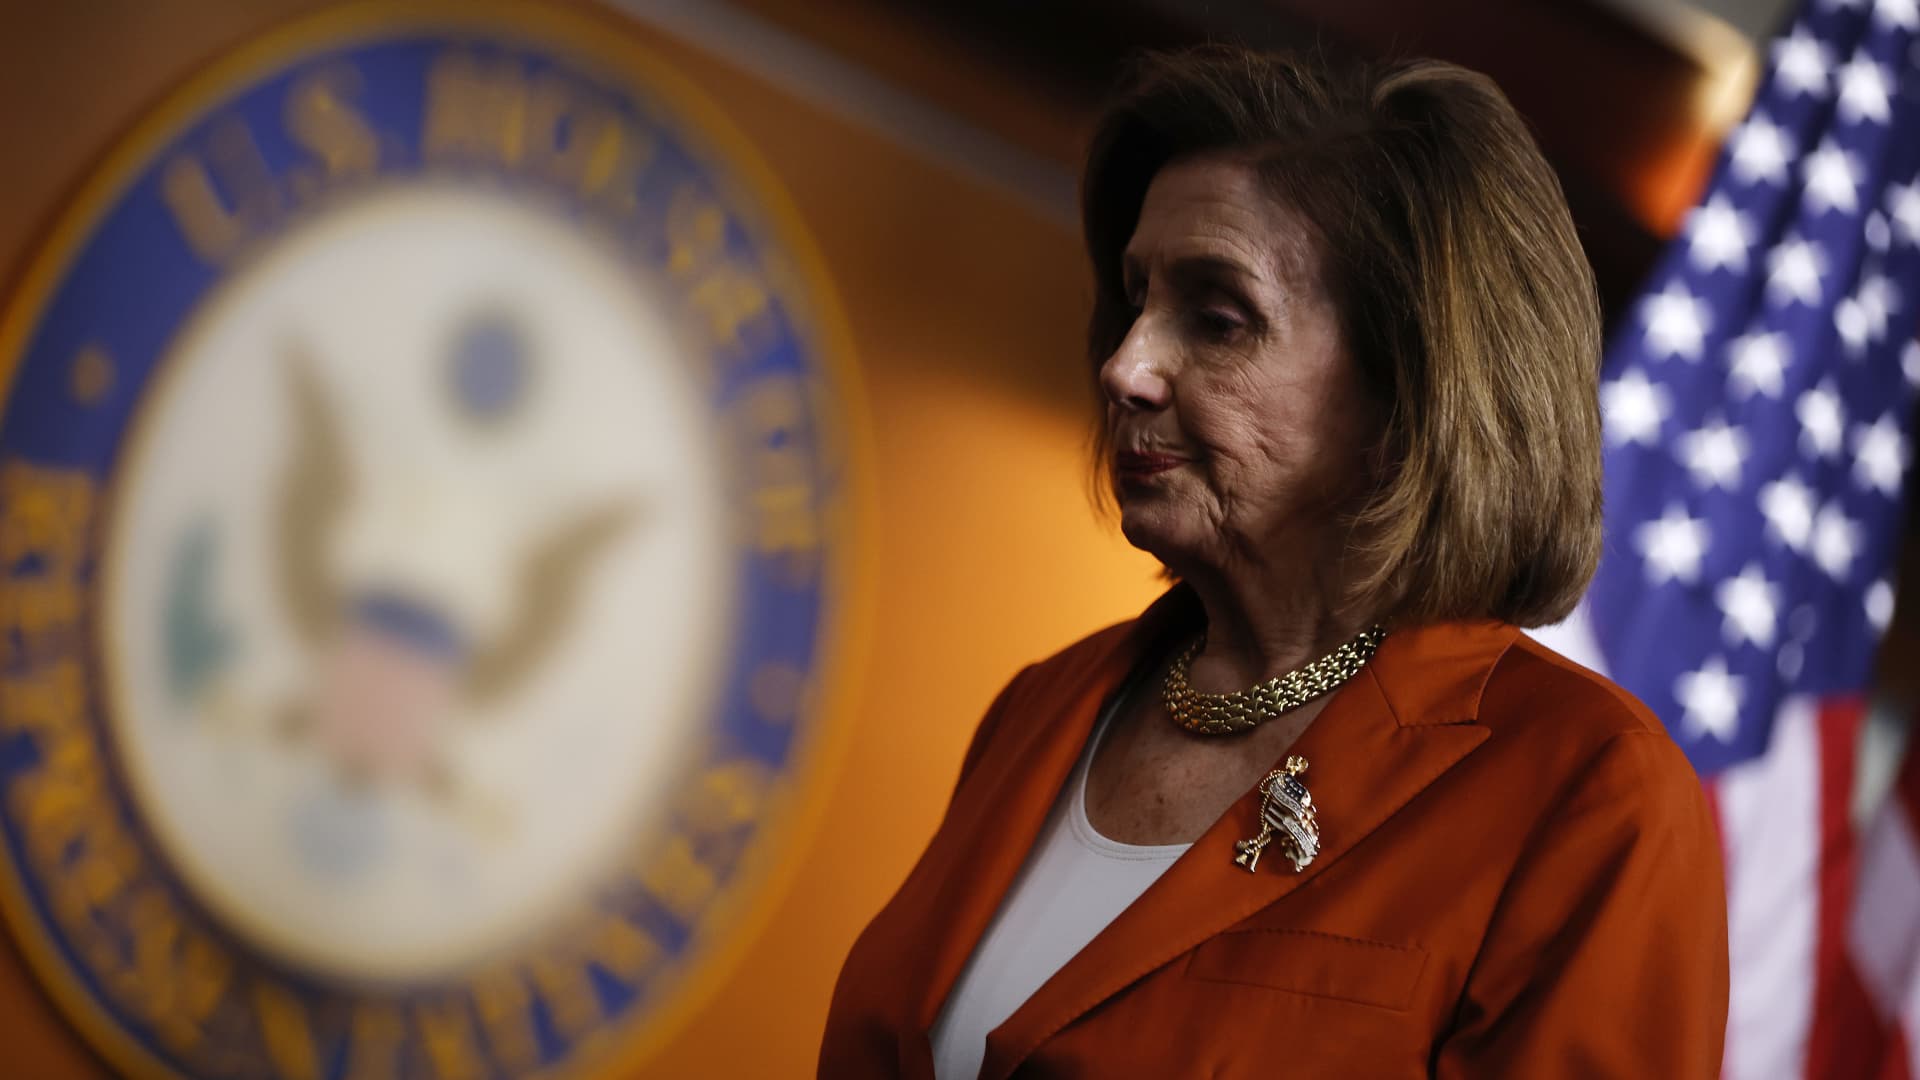 Pelosi says Democrats are mulling plans to protect abortion access, data stored in reproductive health apps